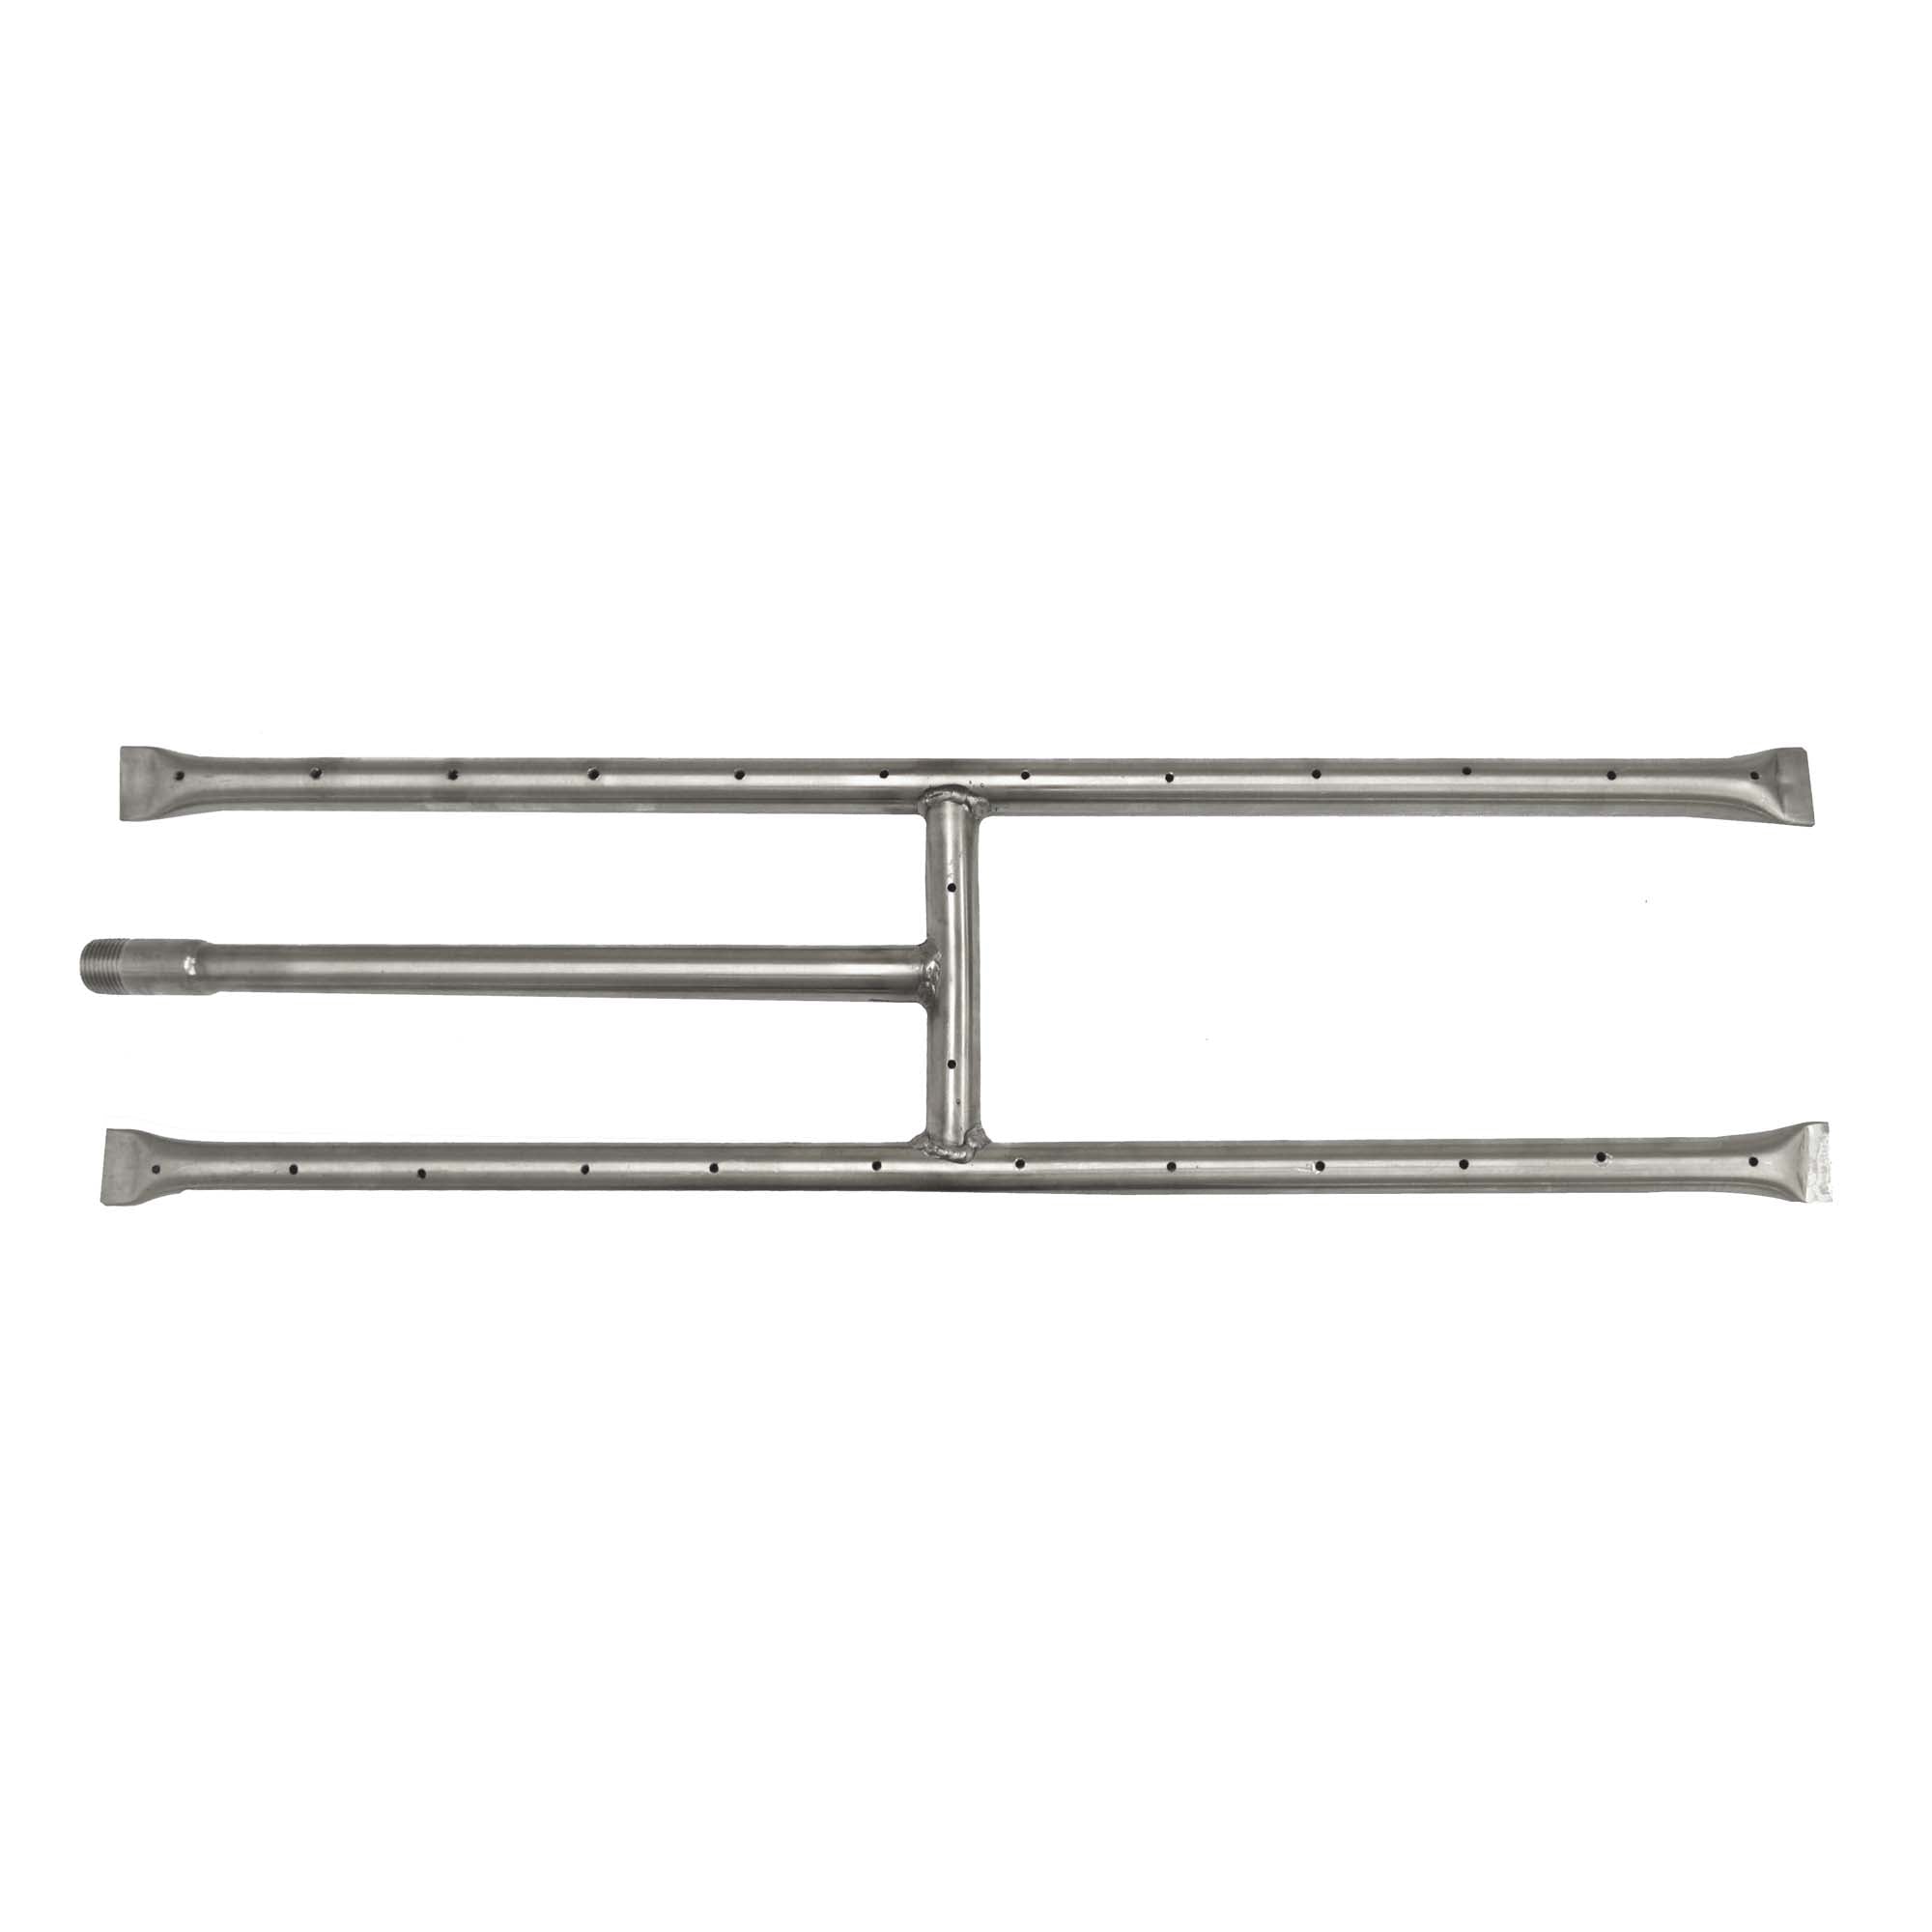 The Outdoor Plus Fireplace H-Burner - Stainless Steel